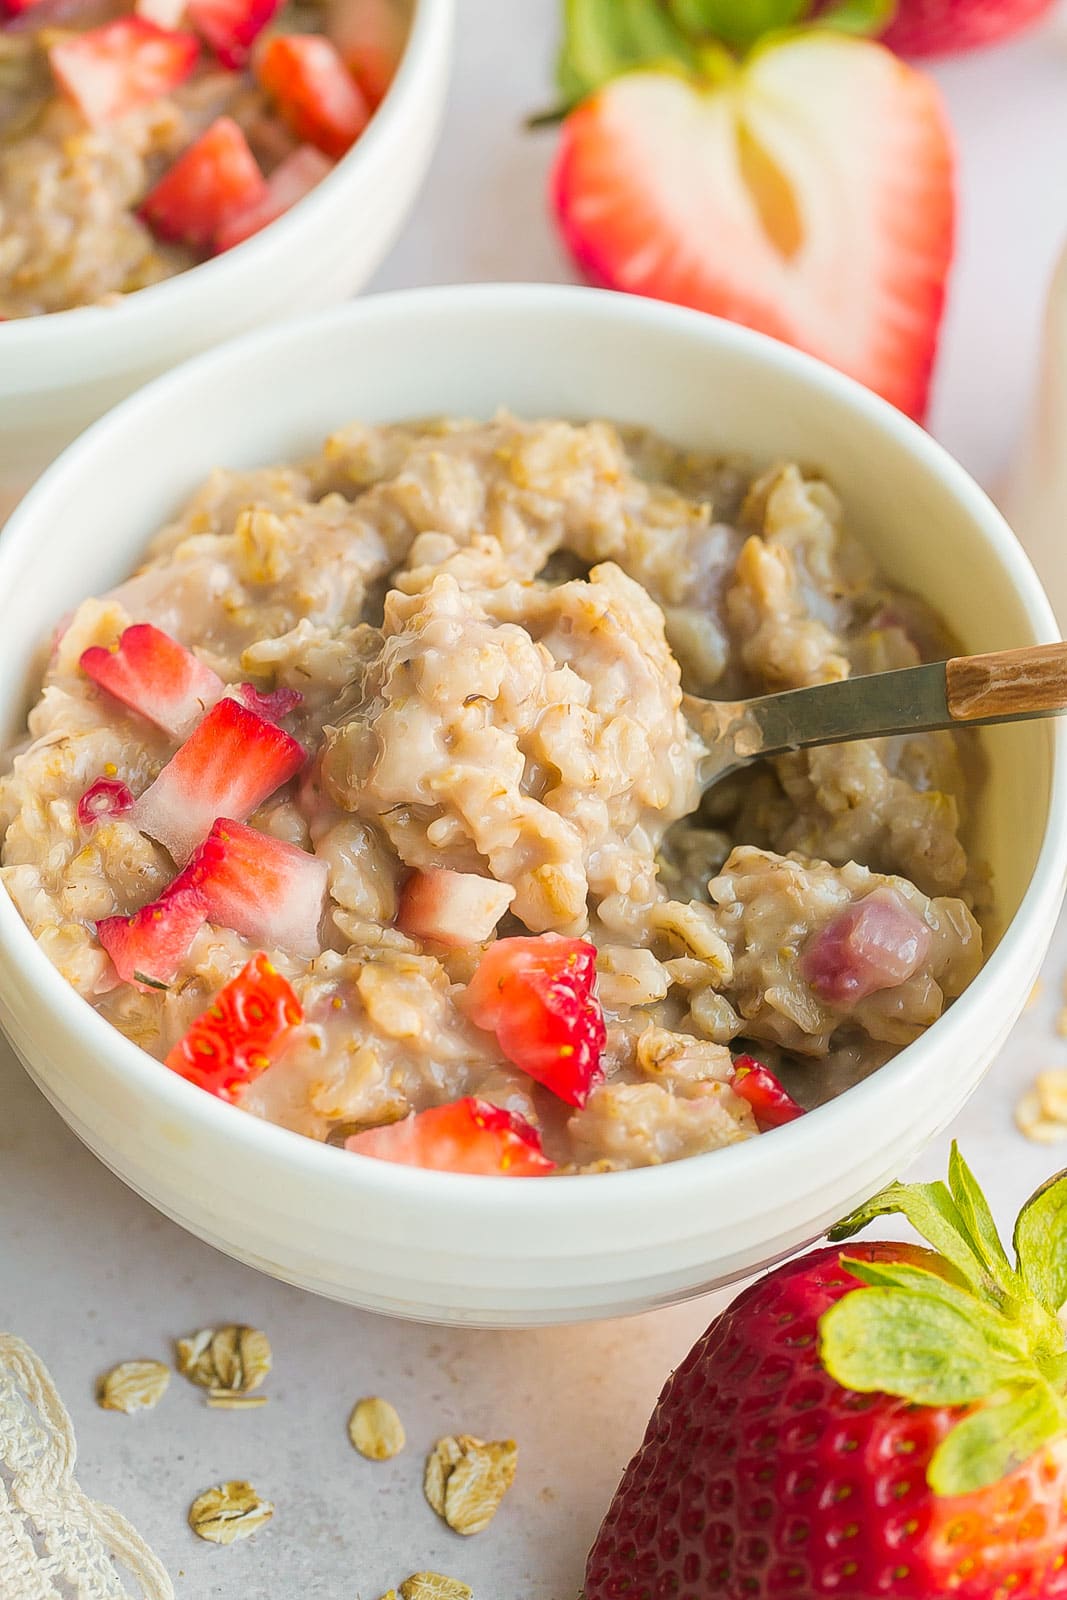 Oatmeal with strawberries on a spoon.